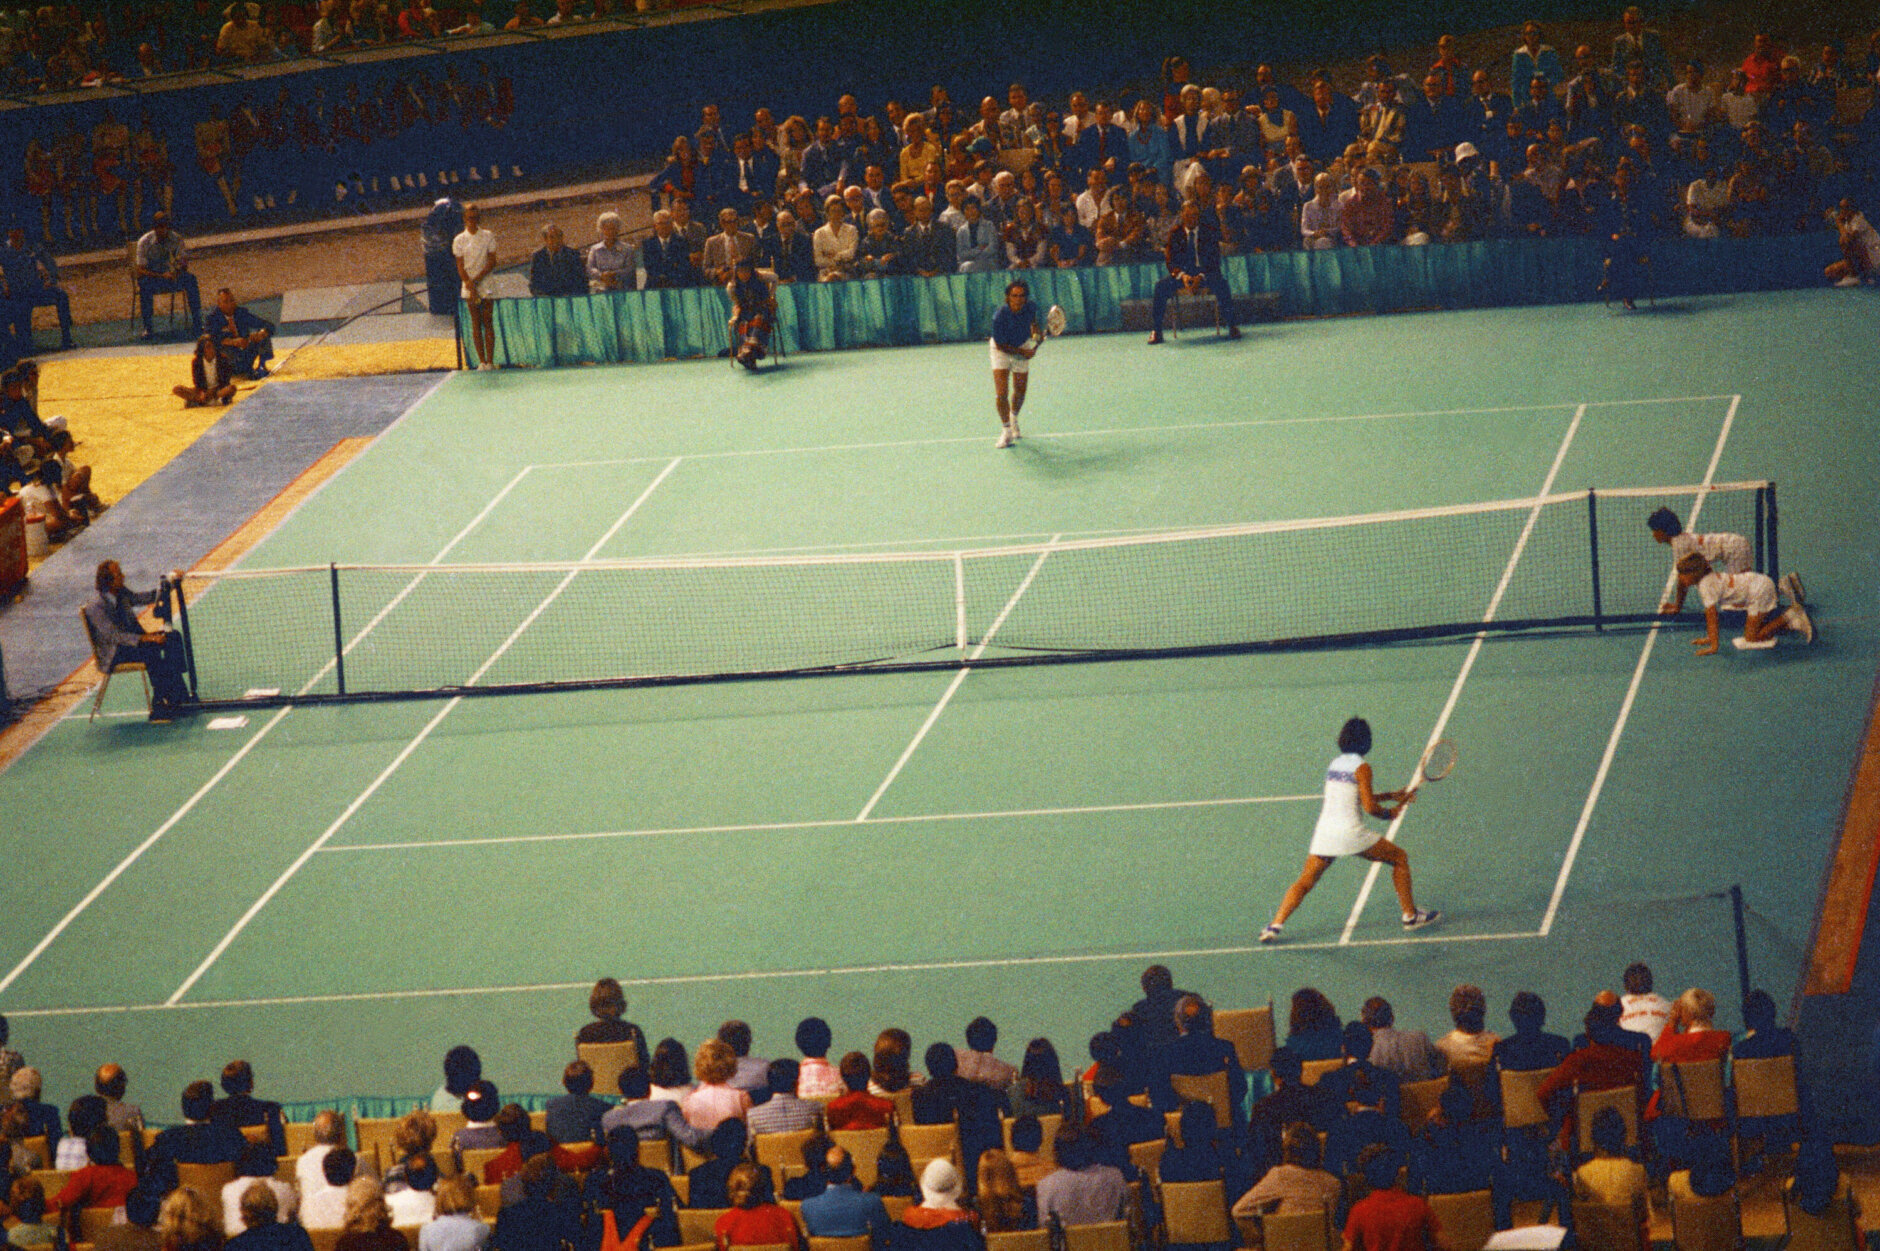 Tennis star Bobby Riggs, top, and Billie Jean King are shown in action during the "Battle of the Sexes" match in the Astrodome in Houston, Tex., Sept. 20, 1973.  (AP Photo))